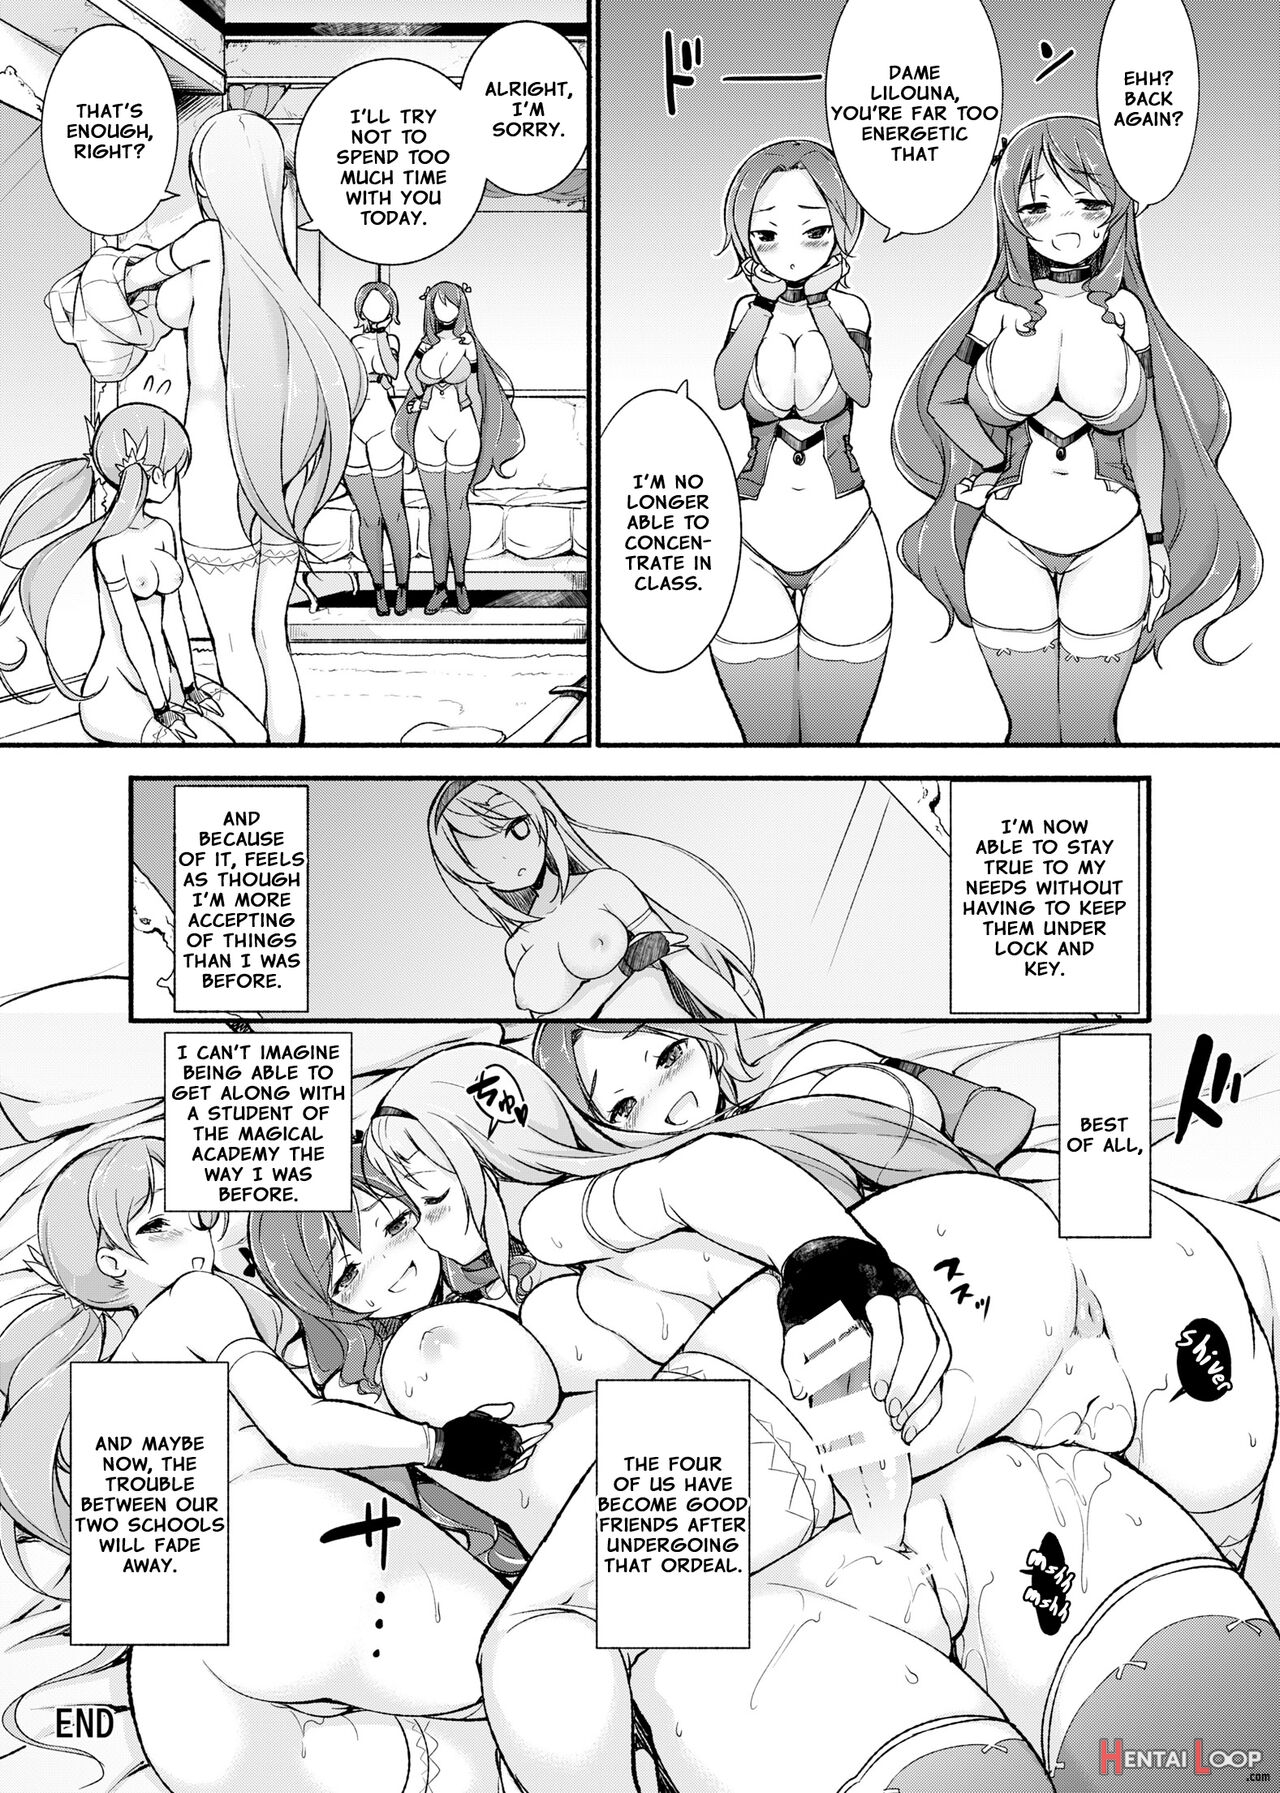 Maiden Knight Lilouna ~the Degenerate Knight-mage Academy Feud~ page 60